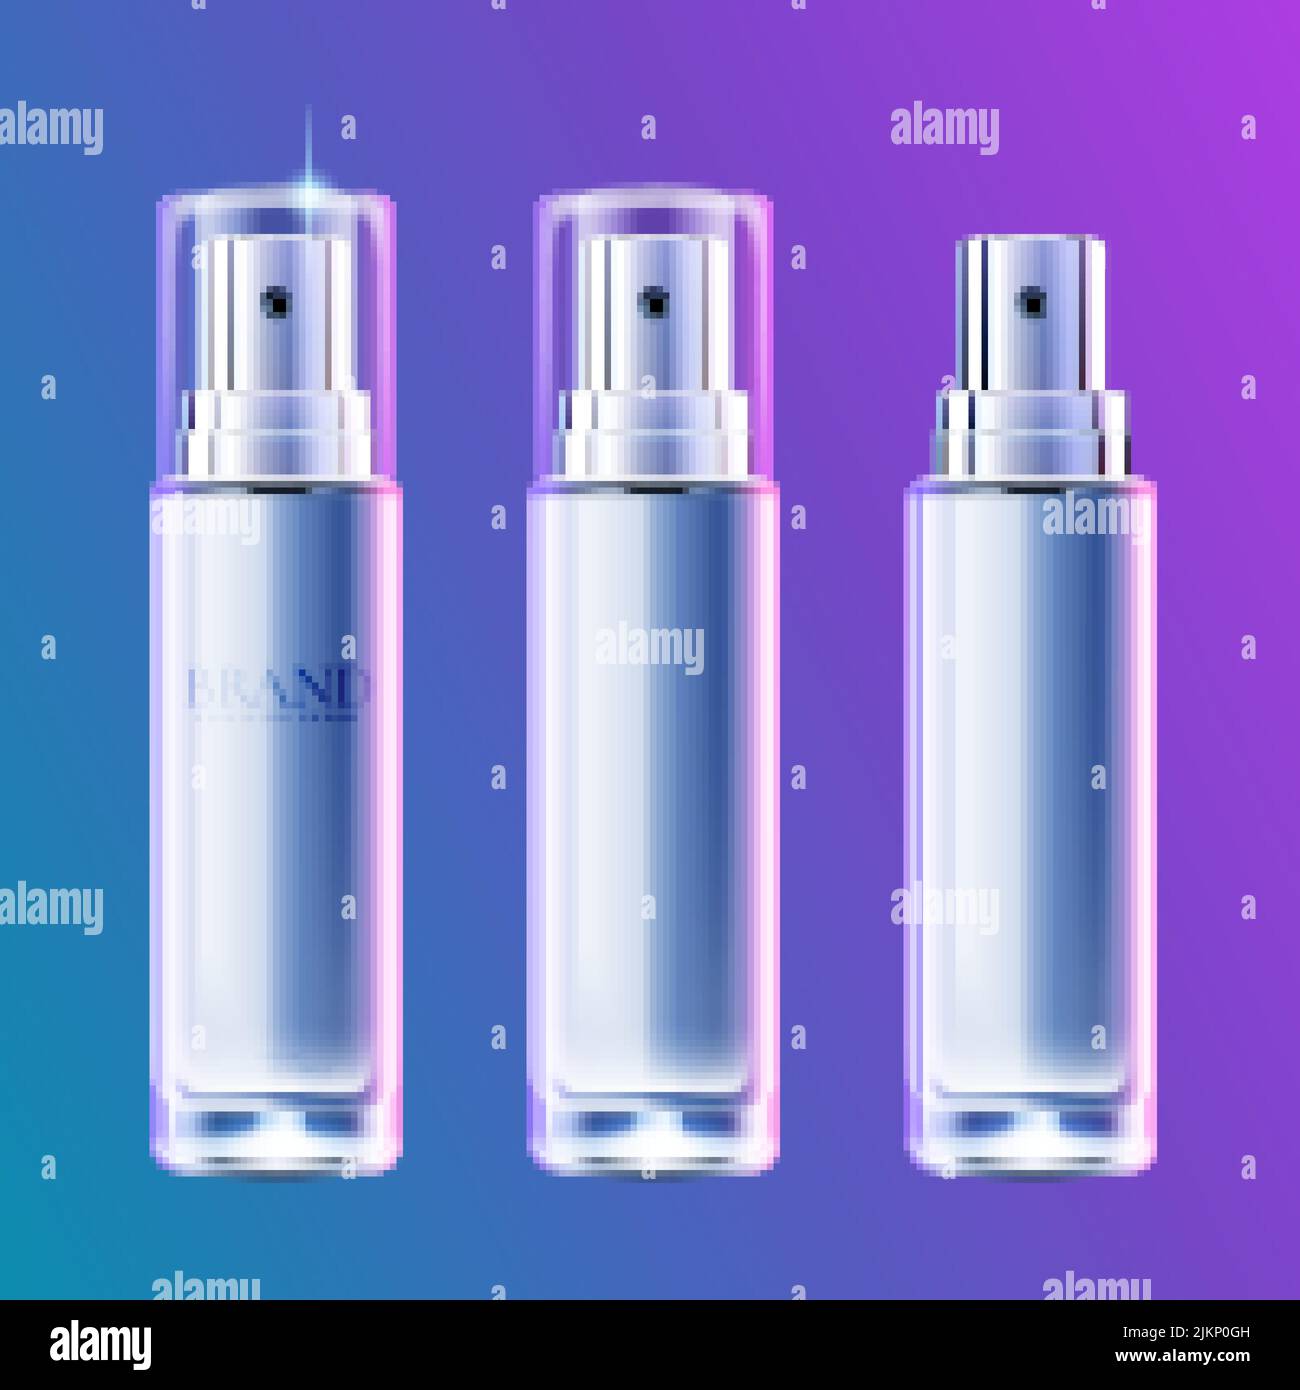 3d cosmetic silver blue essence pump dispenser bottle set. 3 bottles isolated on purple and blue background. Stock Vector